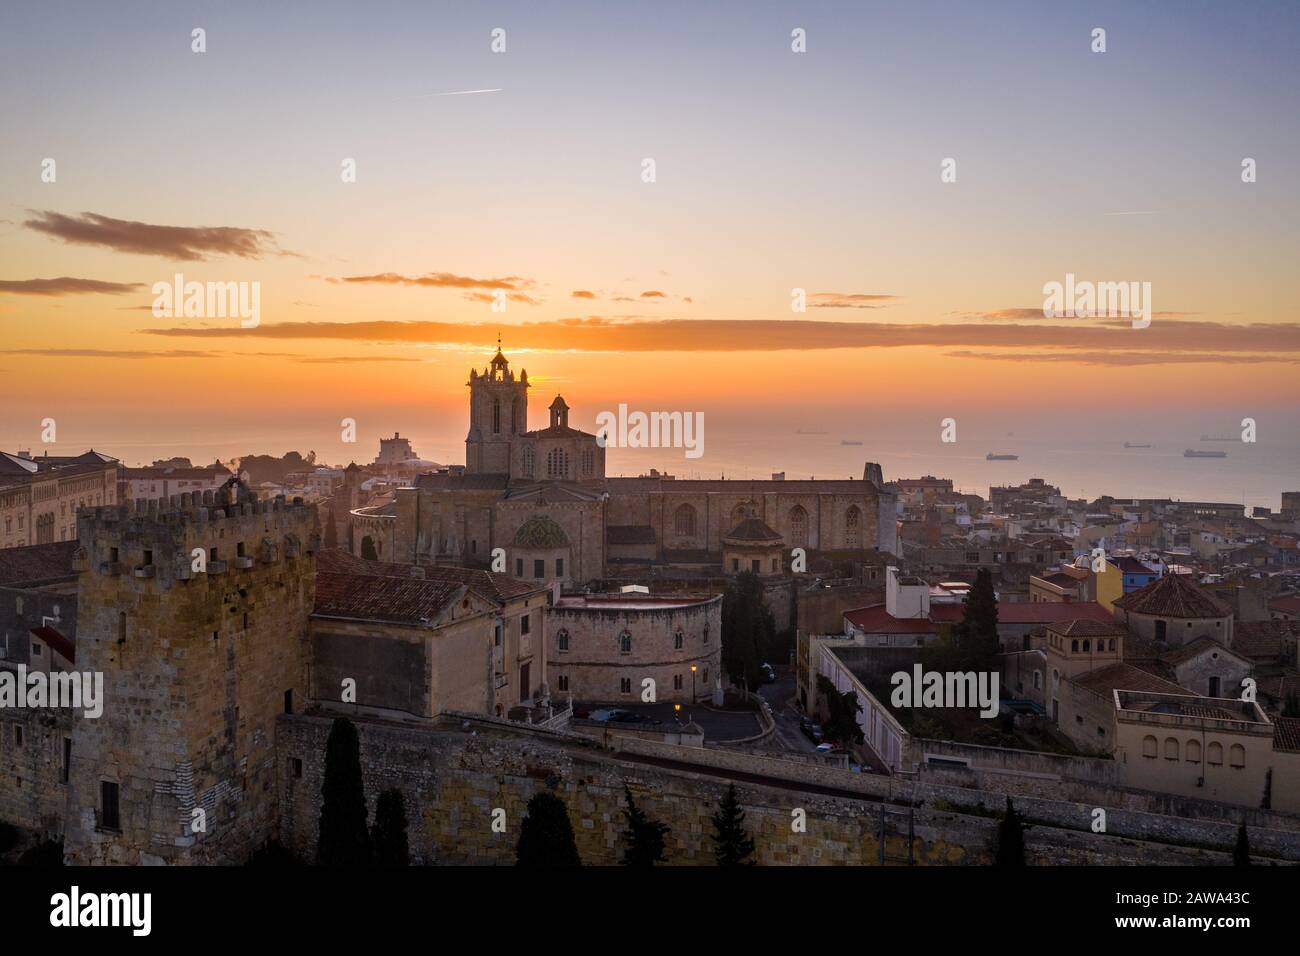 Aerial view of Tarragona Spain during sunrise with view of the Gothic cathedral city walls, bastions, Roman walls and other historic buildings Stock Photo